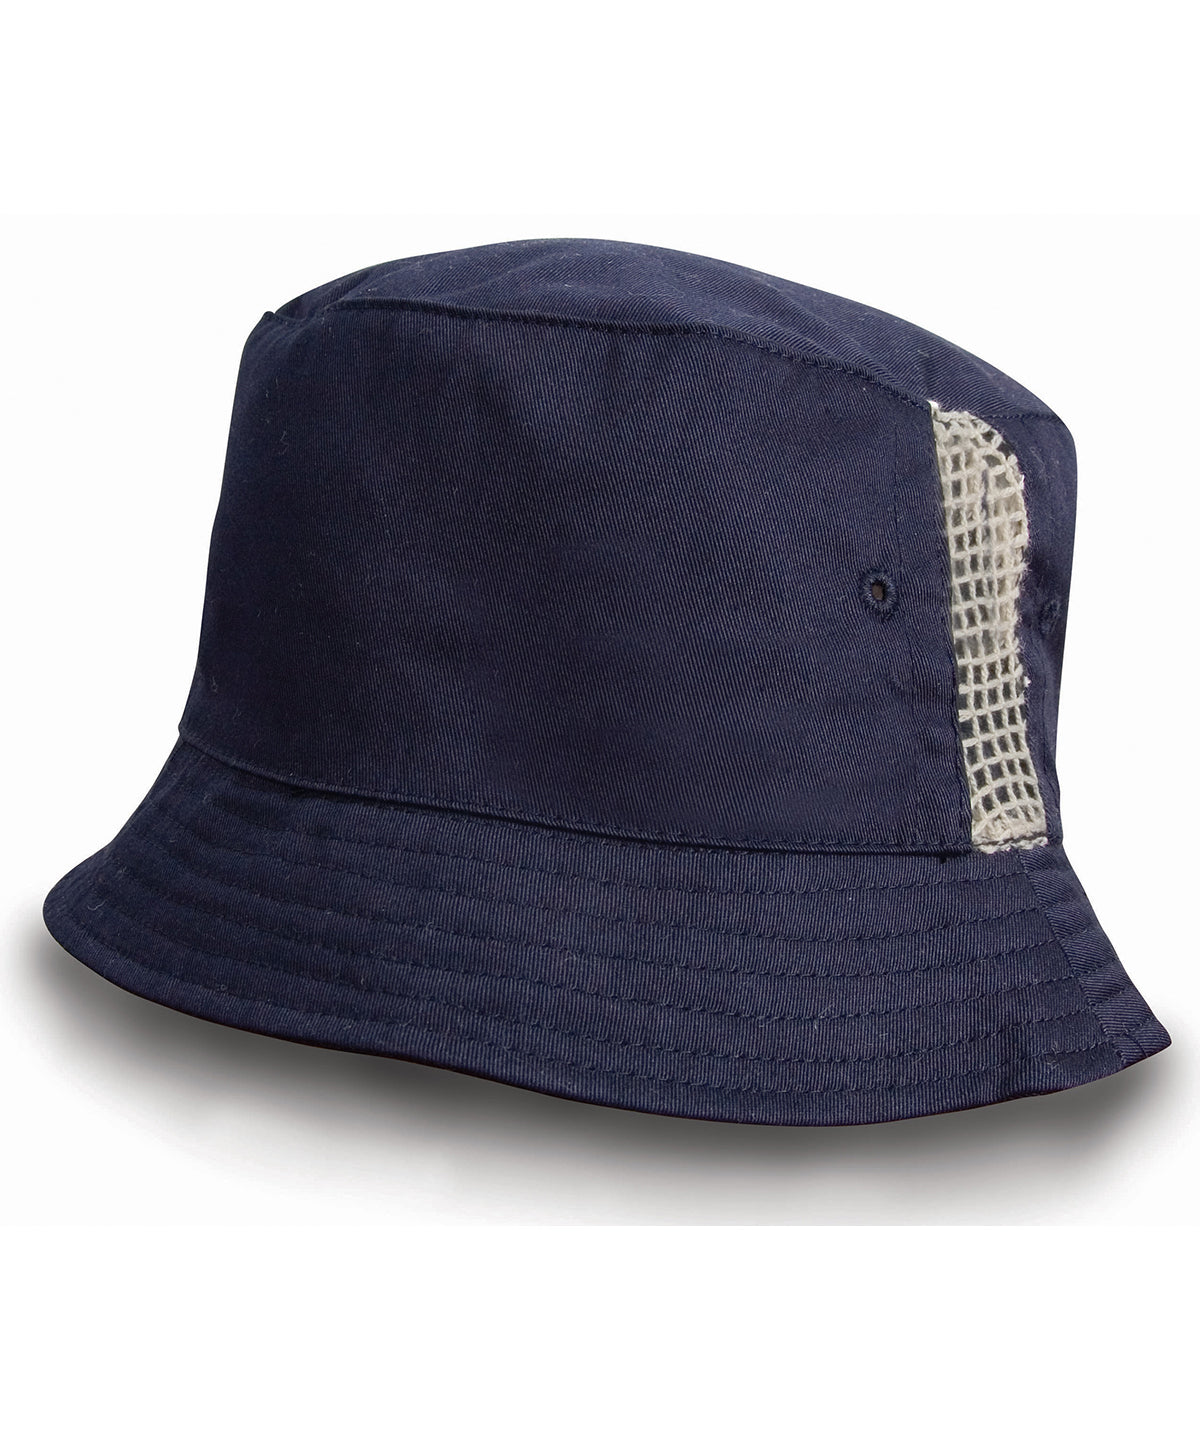 Húfur - Deluxe Washed Cotton Bucket Hat With Side Mesh Panels